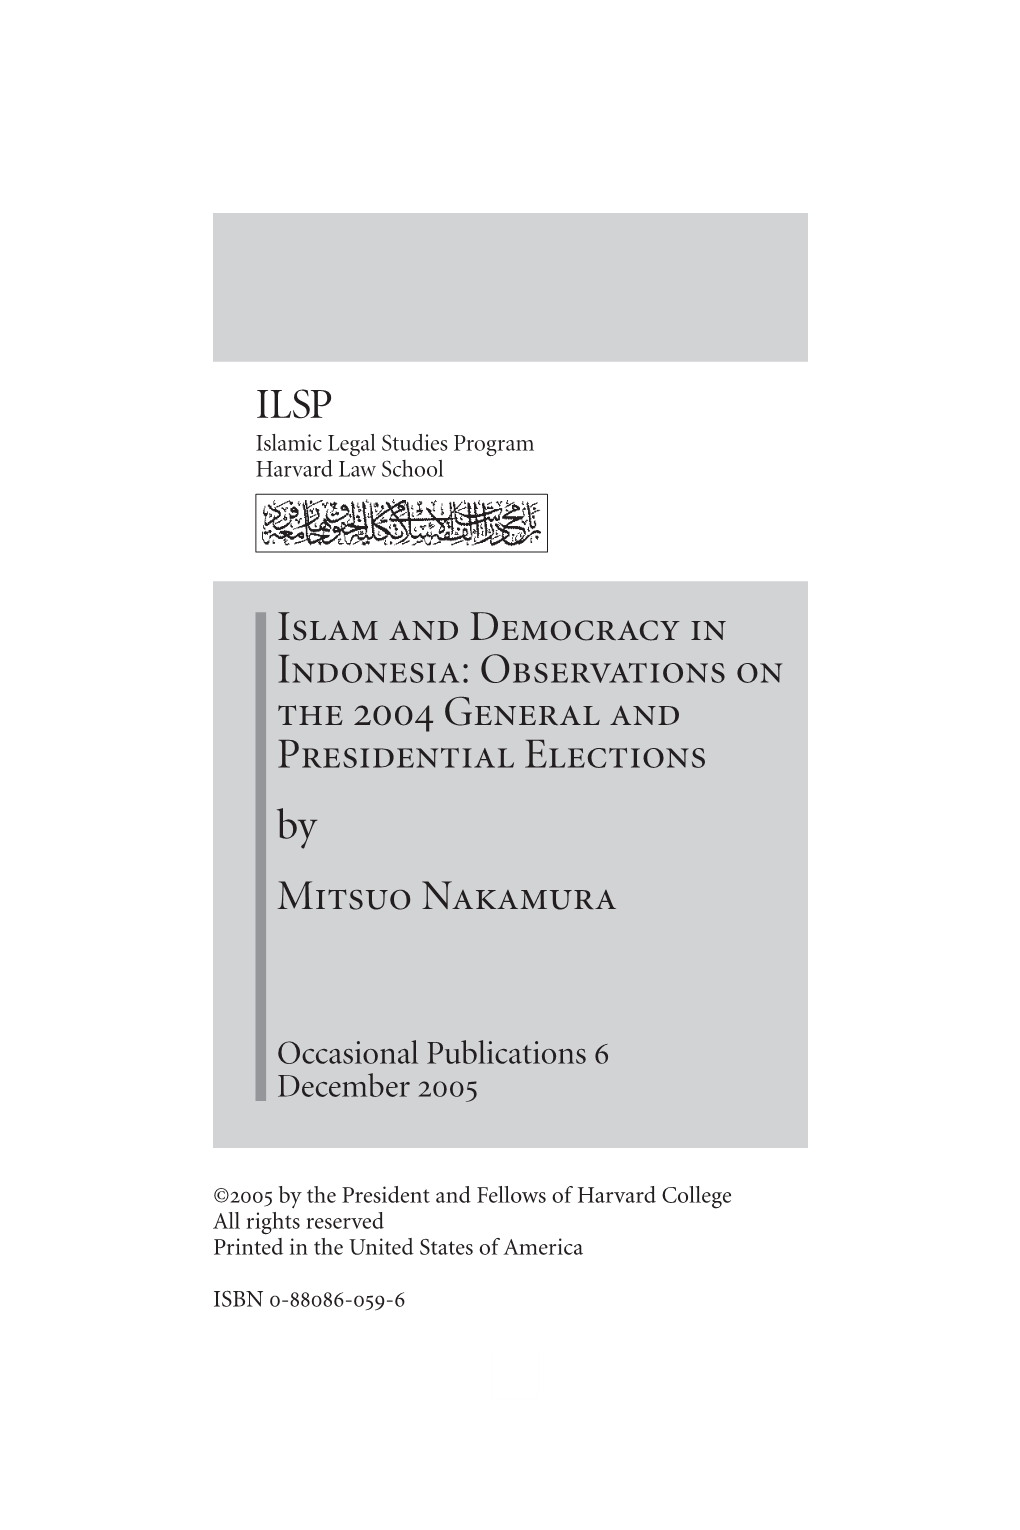 ILSP Islam and Democracy in Indonesia: Observations on the 2004 General and Presidential Elections by Mitsuo Nakamura